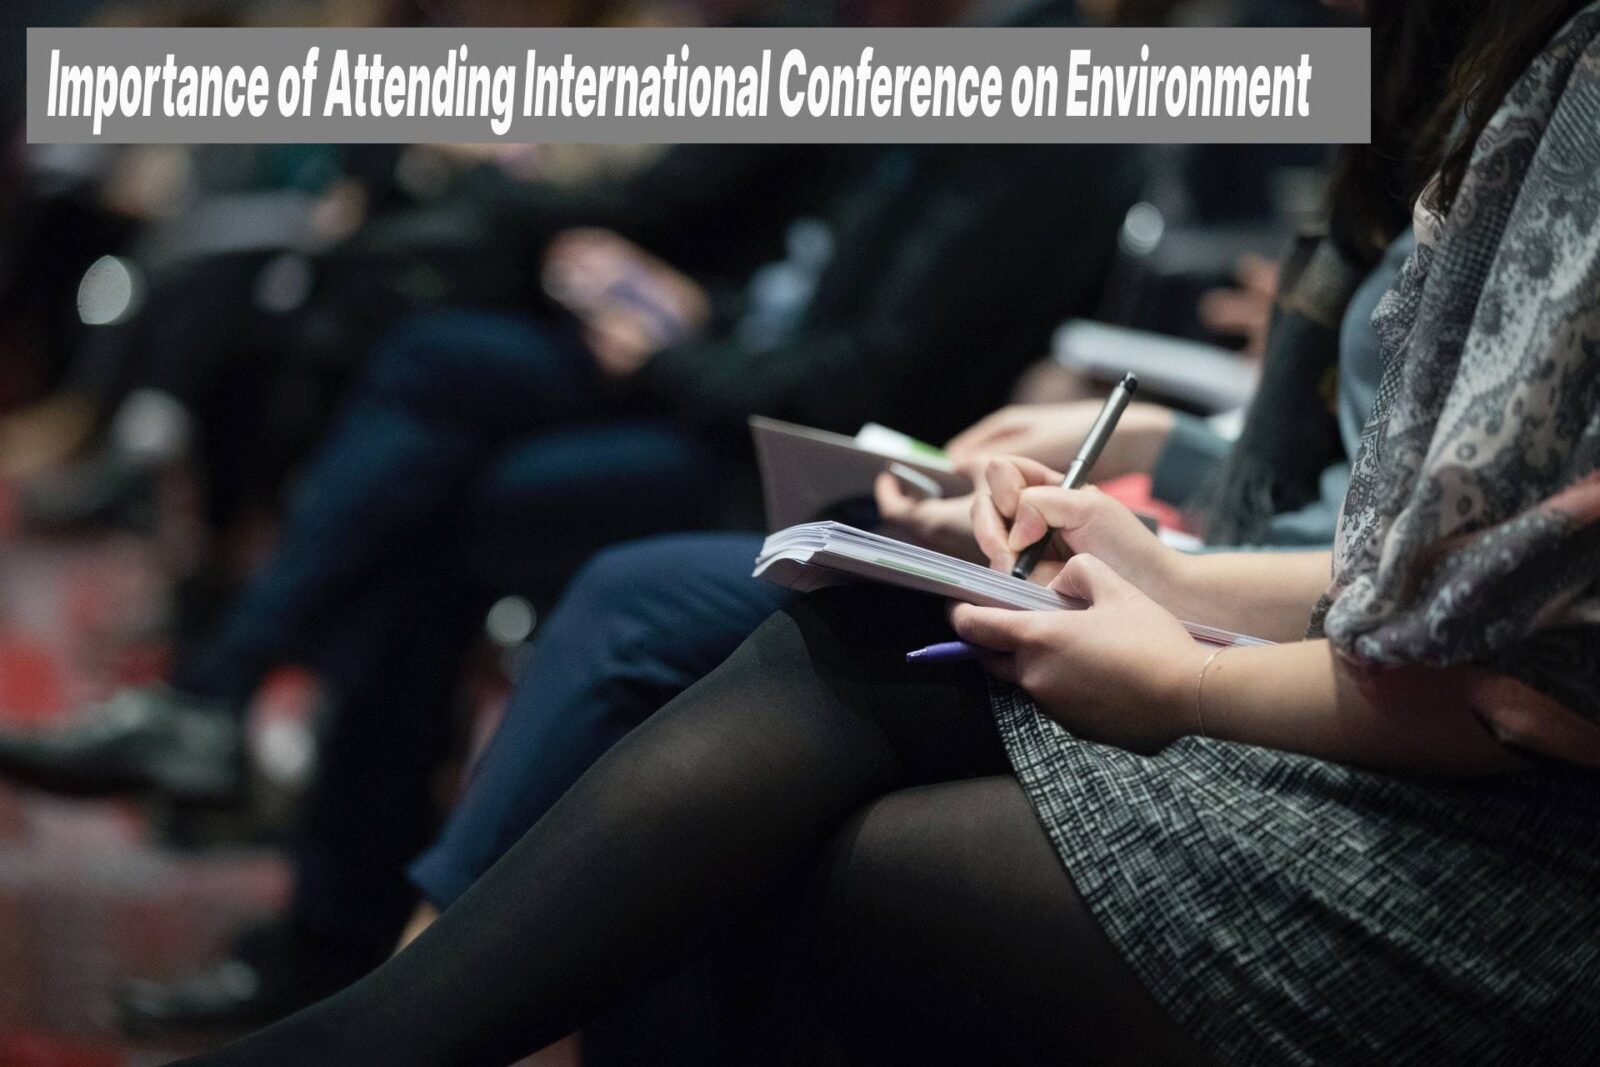 Importance of Attending International Conference on Environment